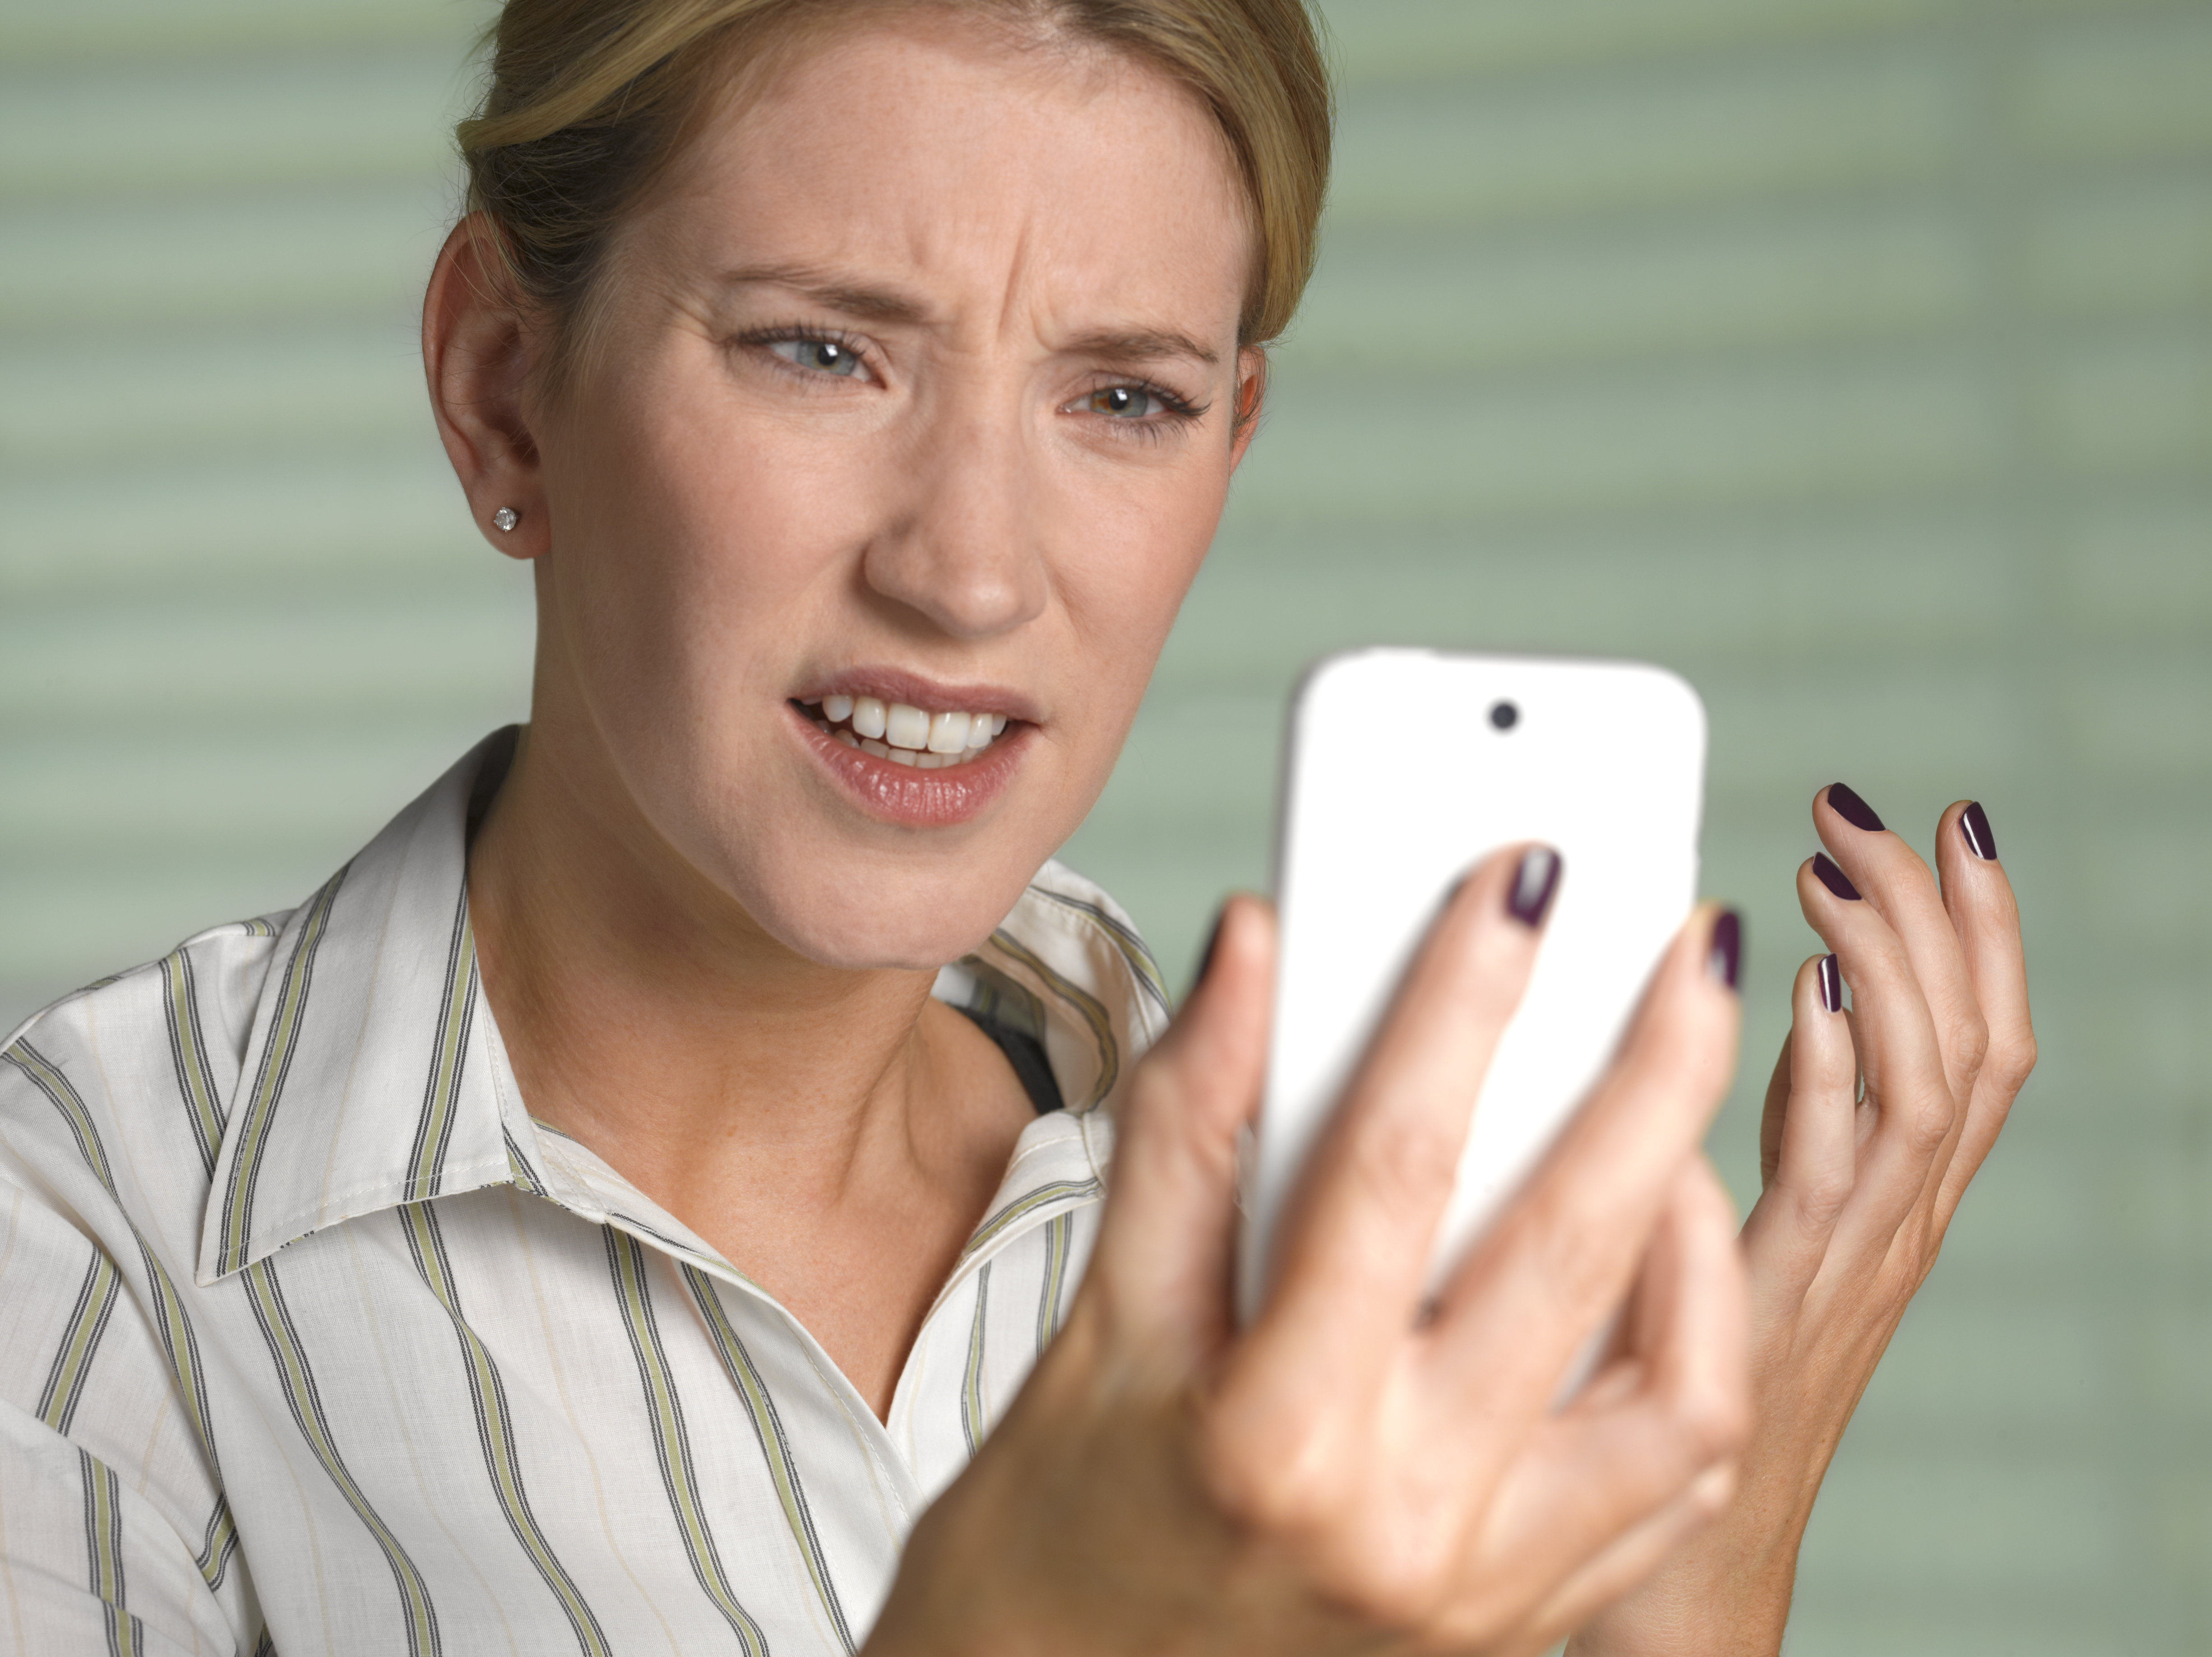 A confused and upset woman looking at a phone | Source: Getty Images